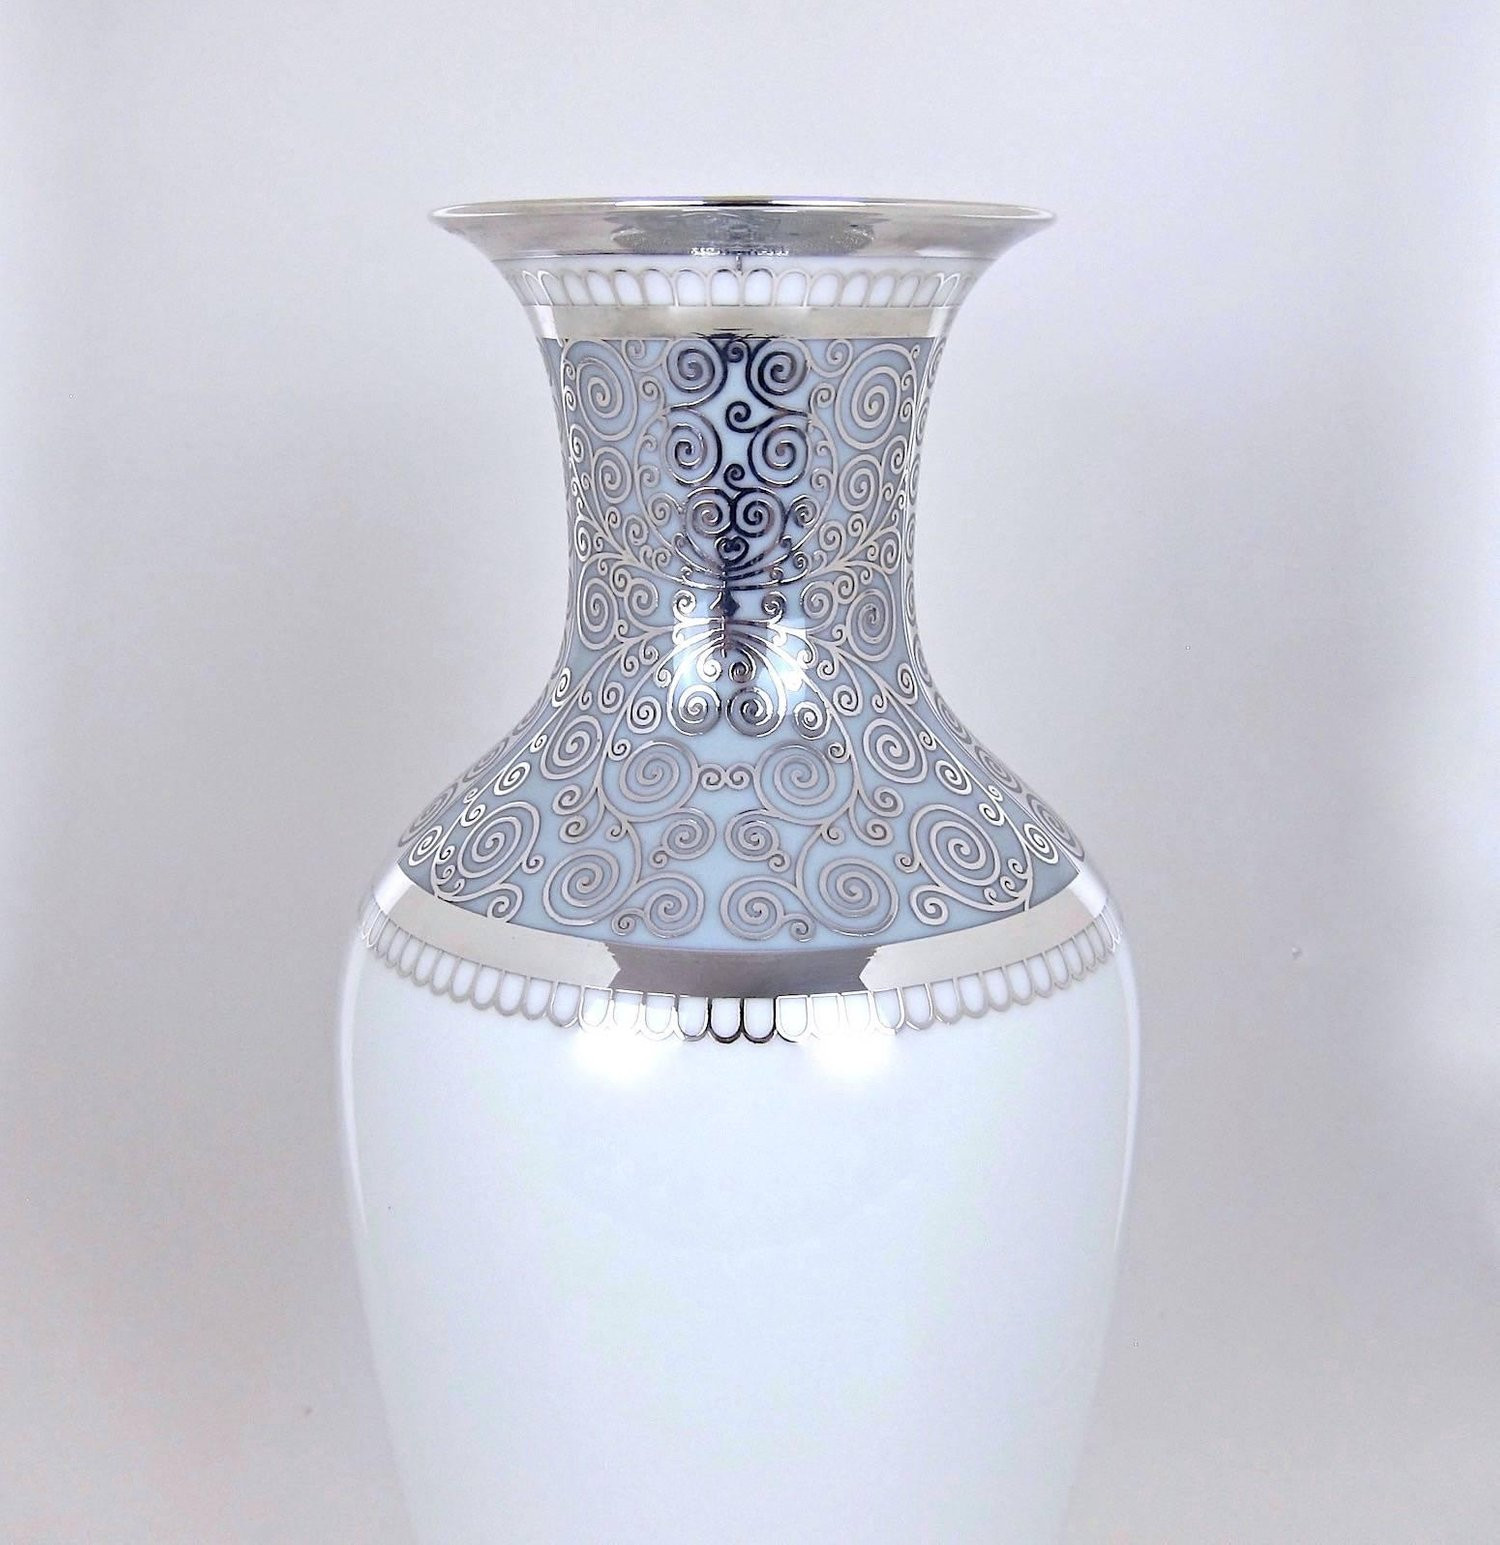 16 Great 4 Feet Tall Glass Vases 2024 free download 4 feet tall glass vases of large rosenthal porcelain silver overlay vase at 1stdibs for rosenthal porcelain silver overlay vase 06 master